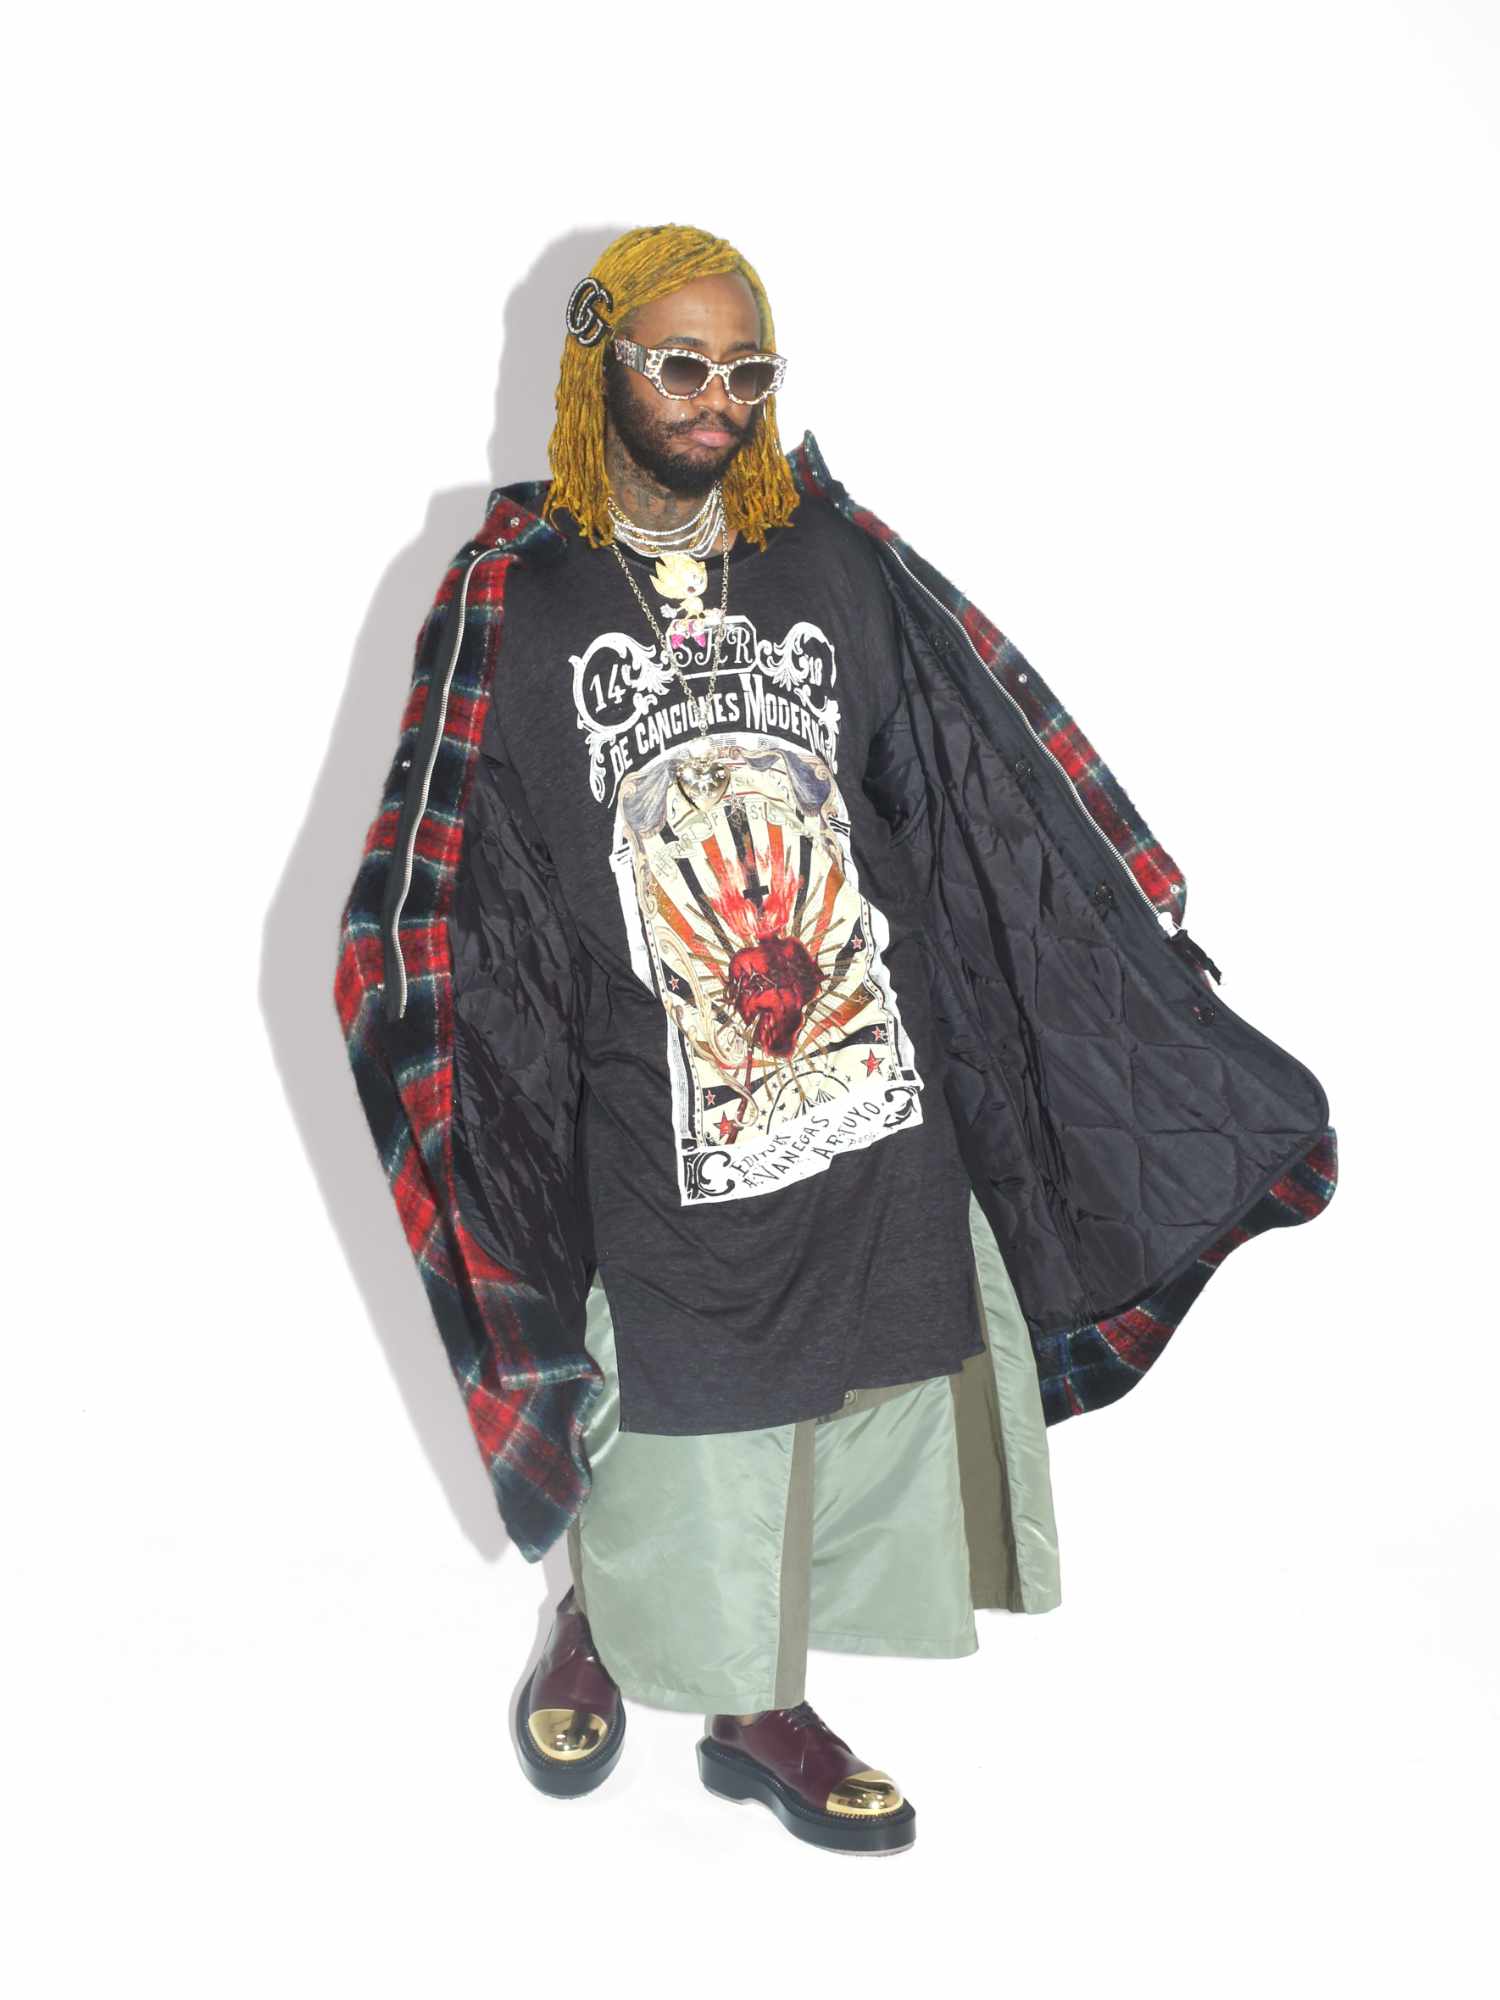 Thundercat wears his own clothing line